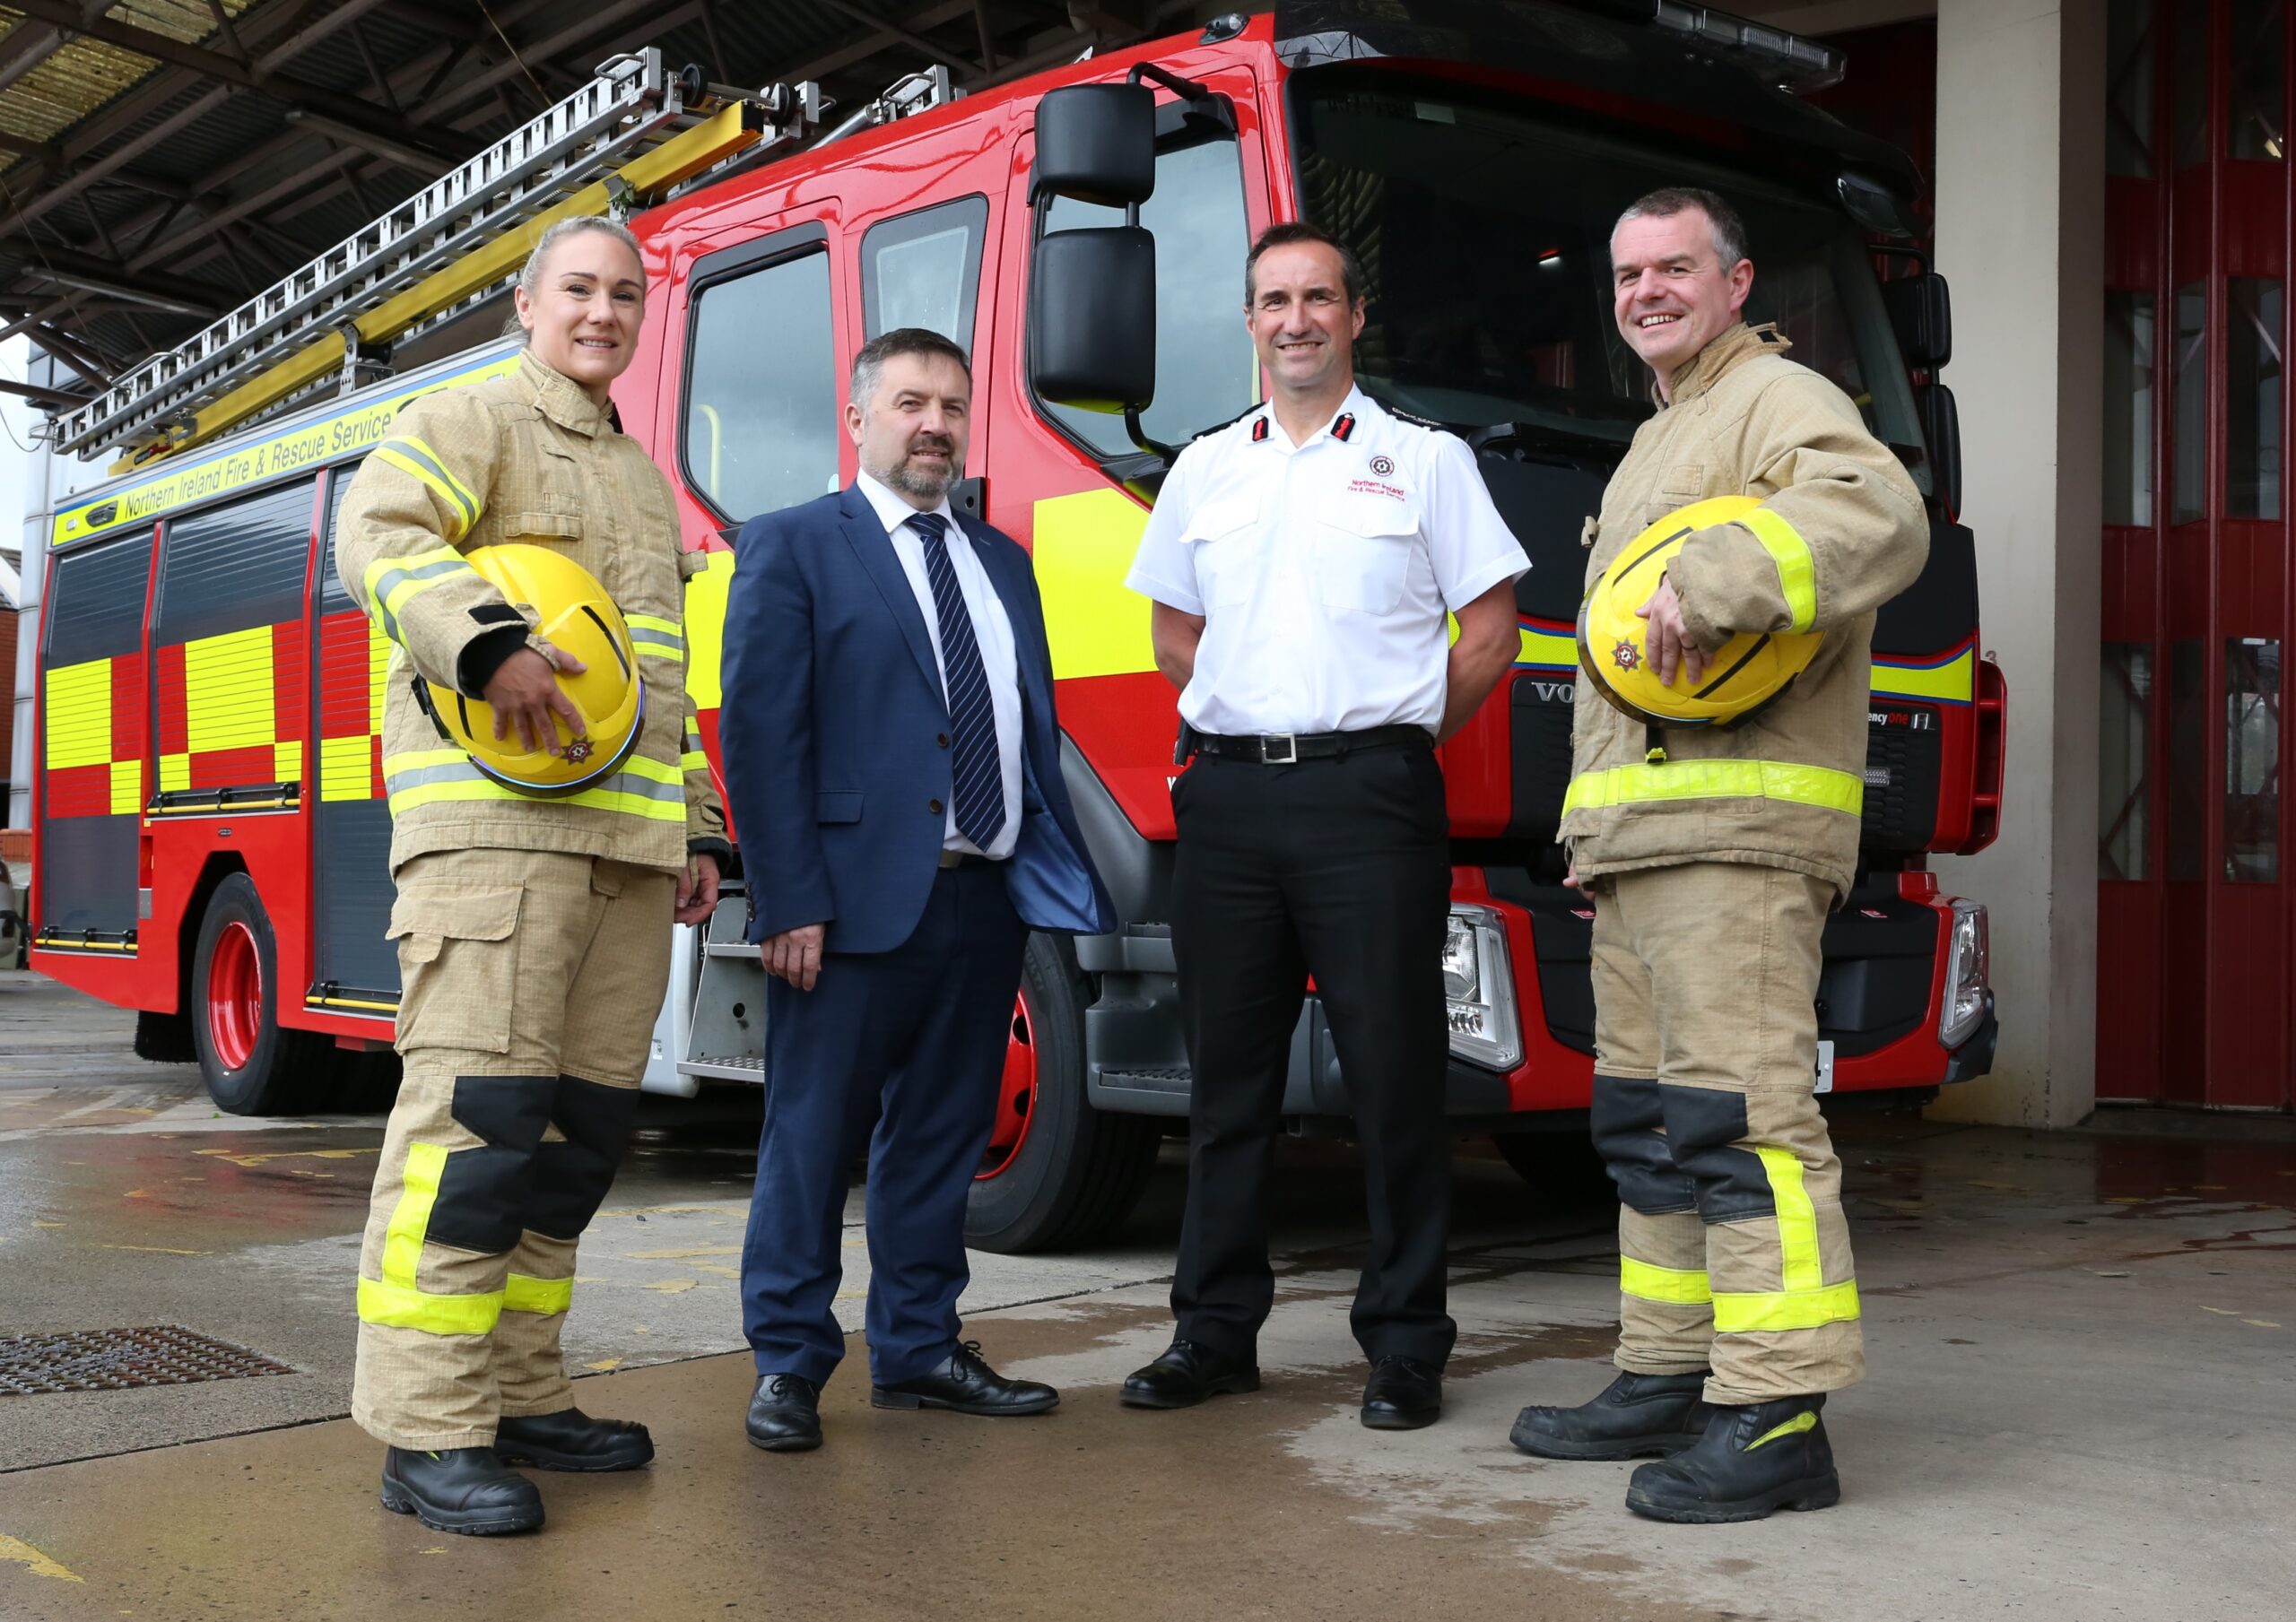 Firefighters with Minister Robin Swann and CFRO Andy Hearn